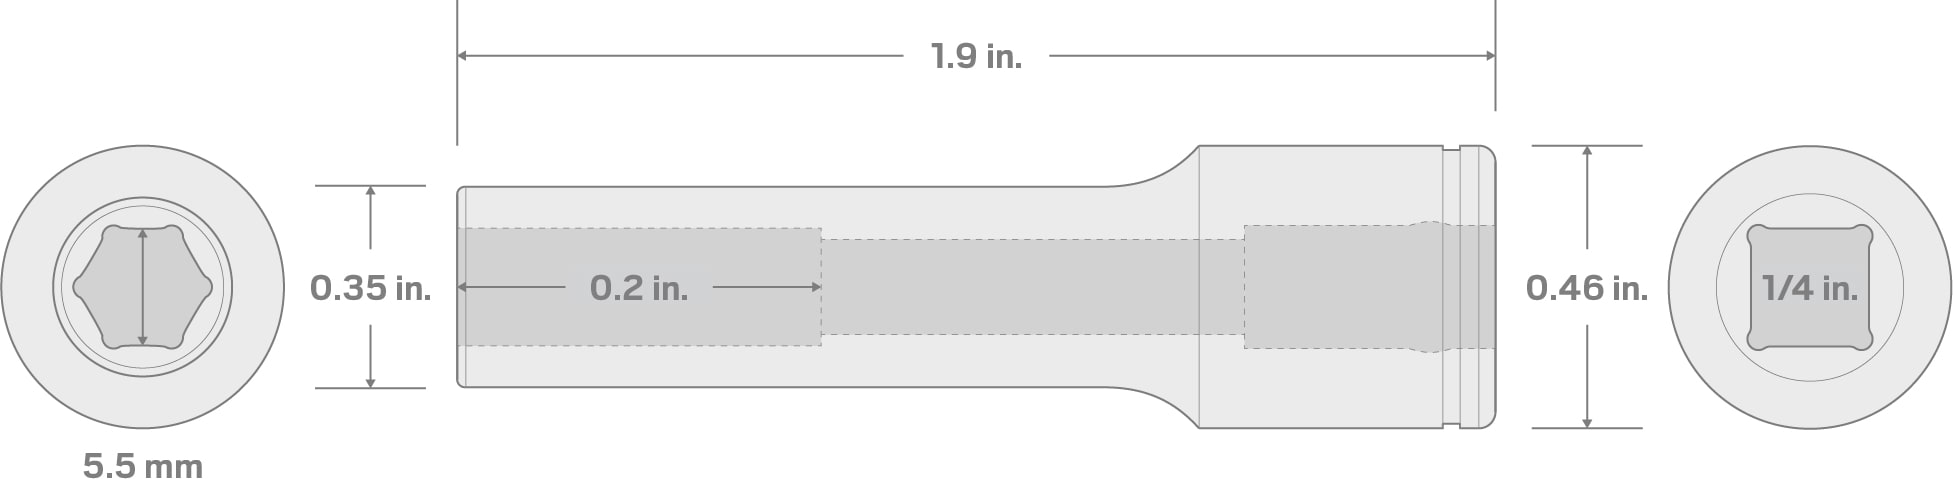 Specs for 1/4 Inch Drive x 5.5 mm Deep 6-Point Socket